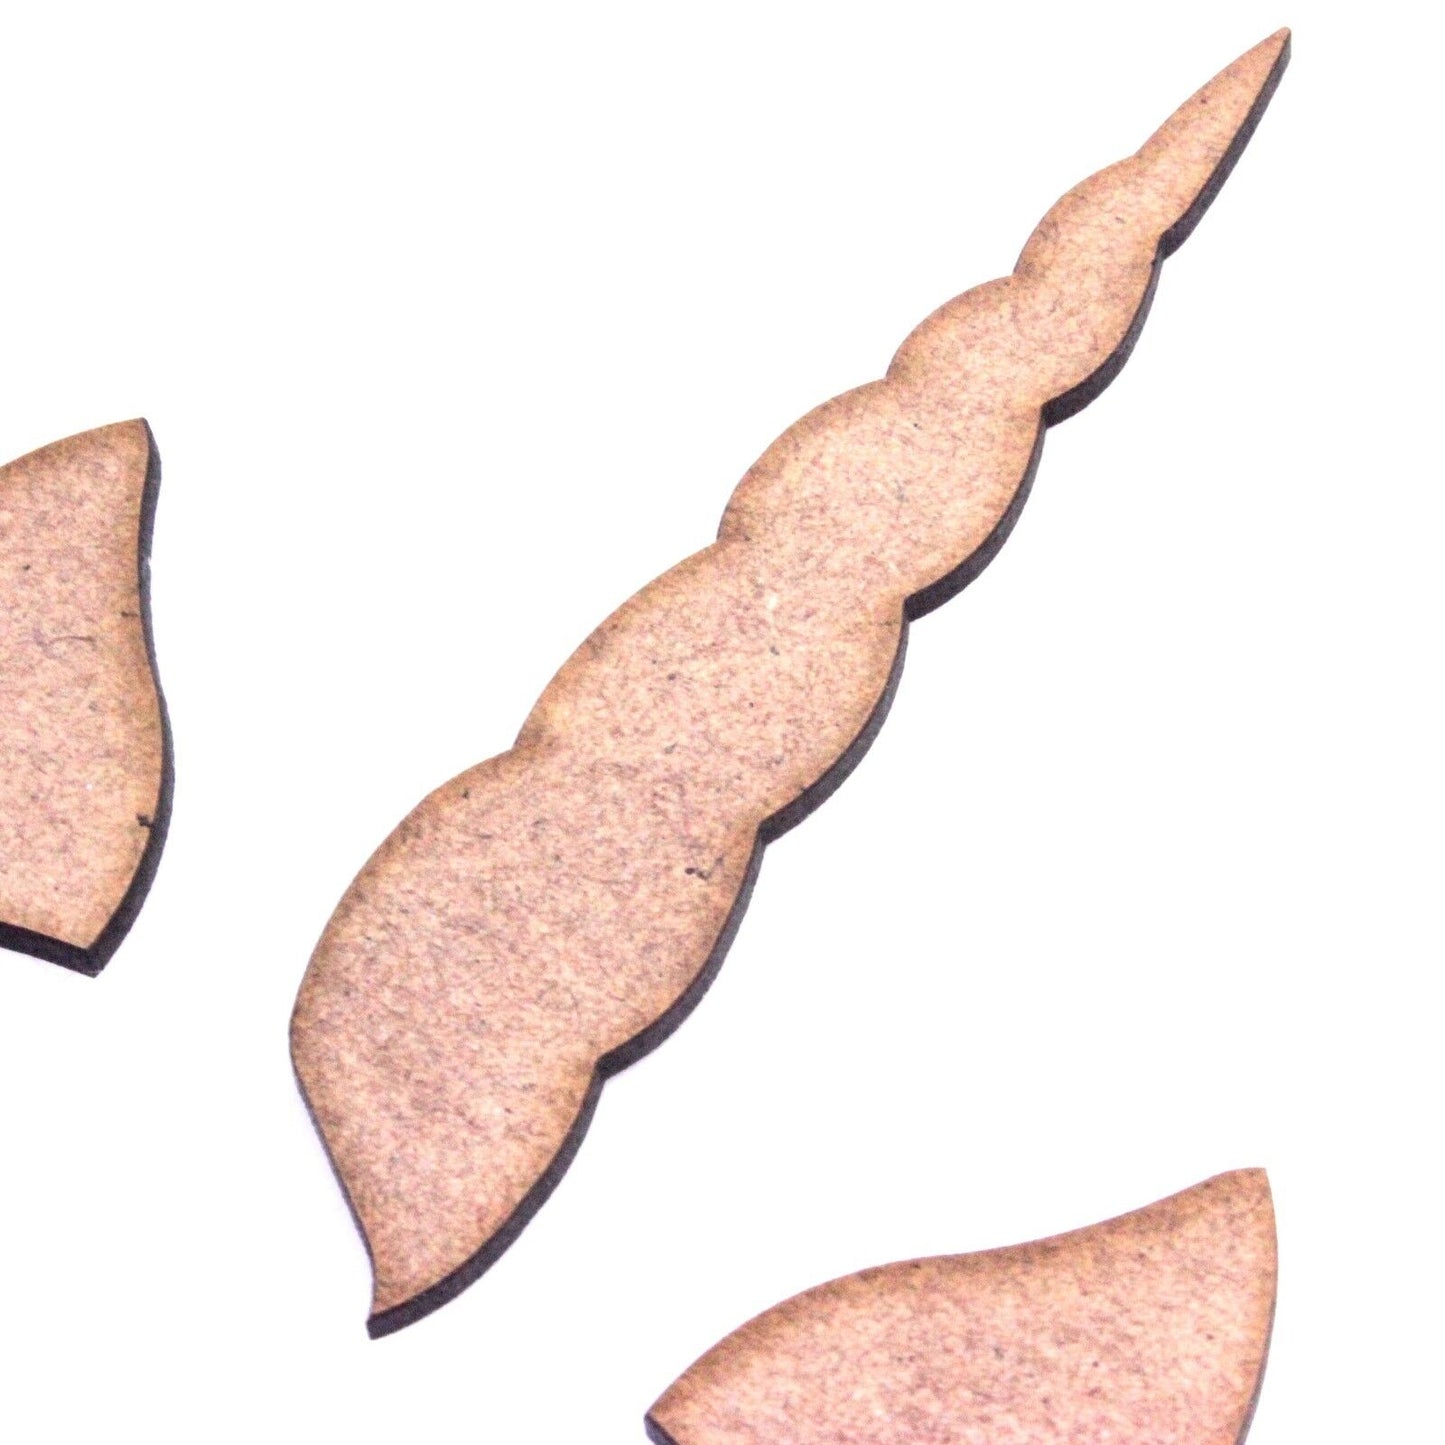 Unicorn Horn and Ears Craft Shape, Various Sizes, 2mm MDF Wood. Mythical